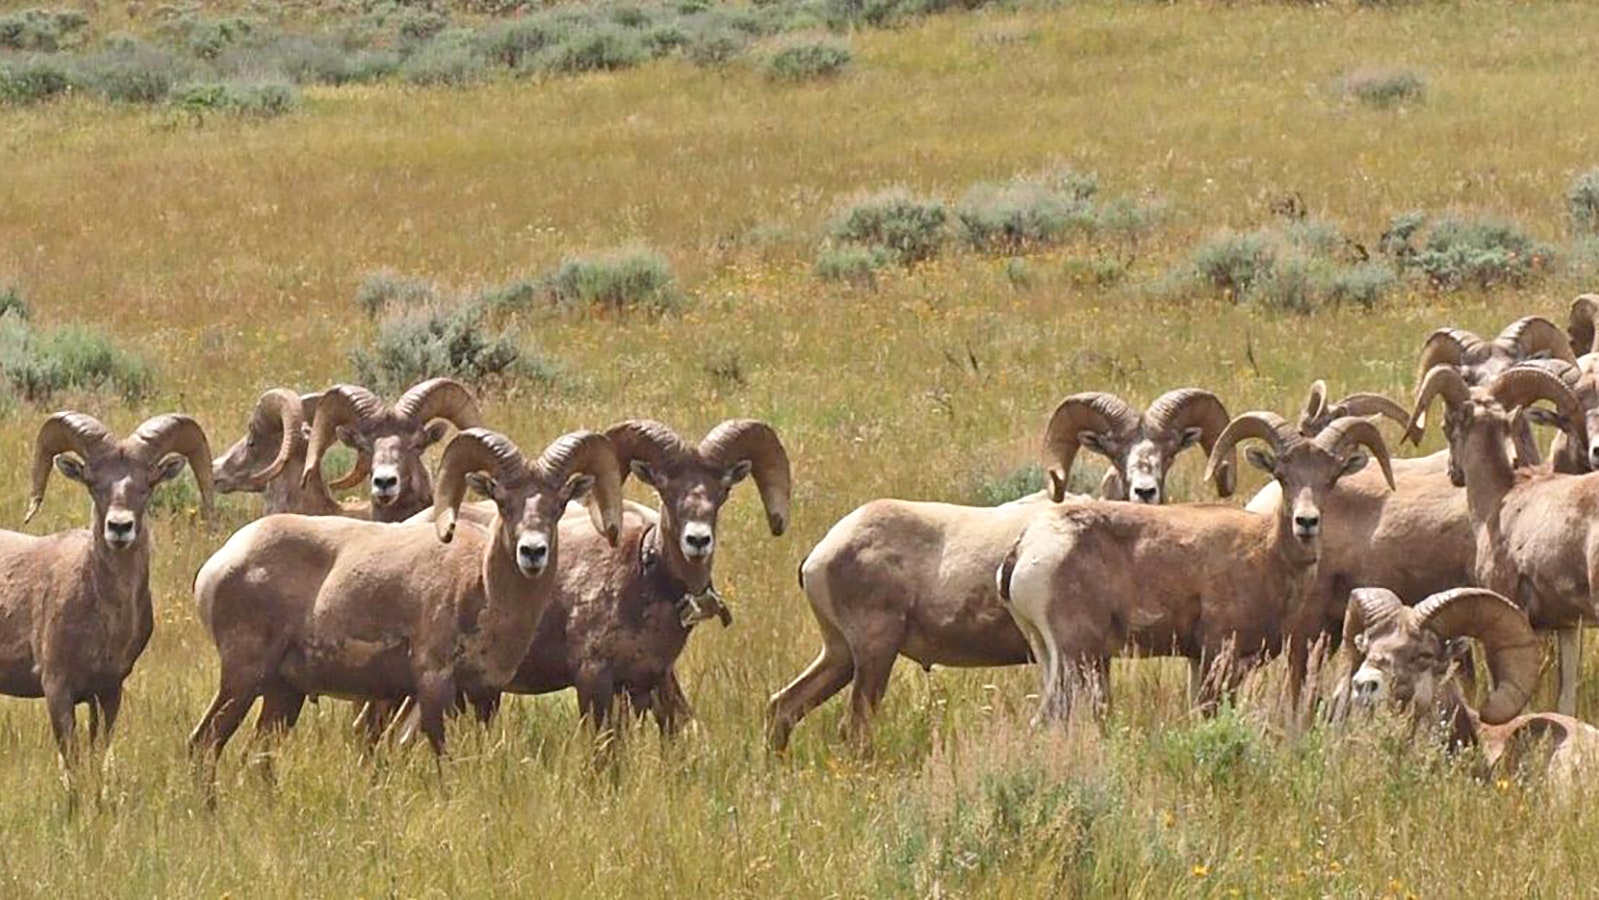 Bighorn sheep in Wyoming's Devils Canyon.